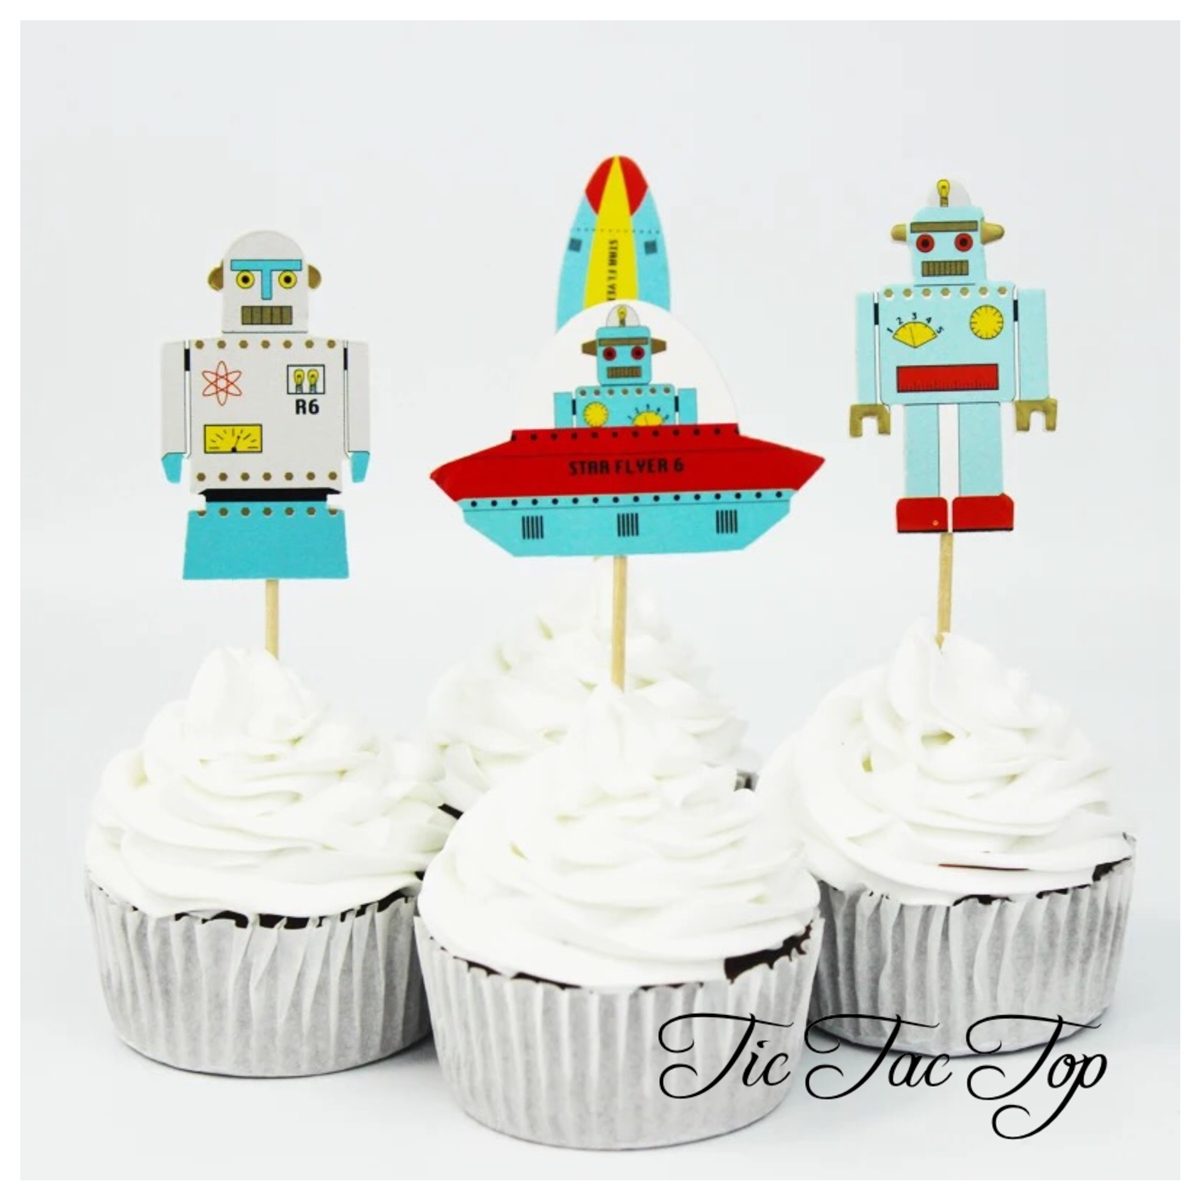 Robot Theme Party Supplies,24pcs Cupcake Toppers Italy | Ubuy